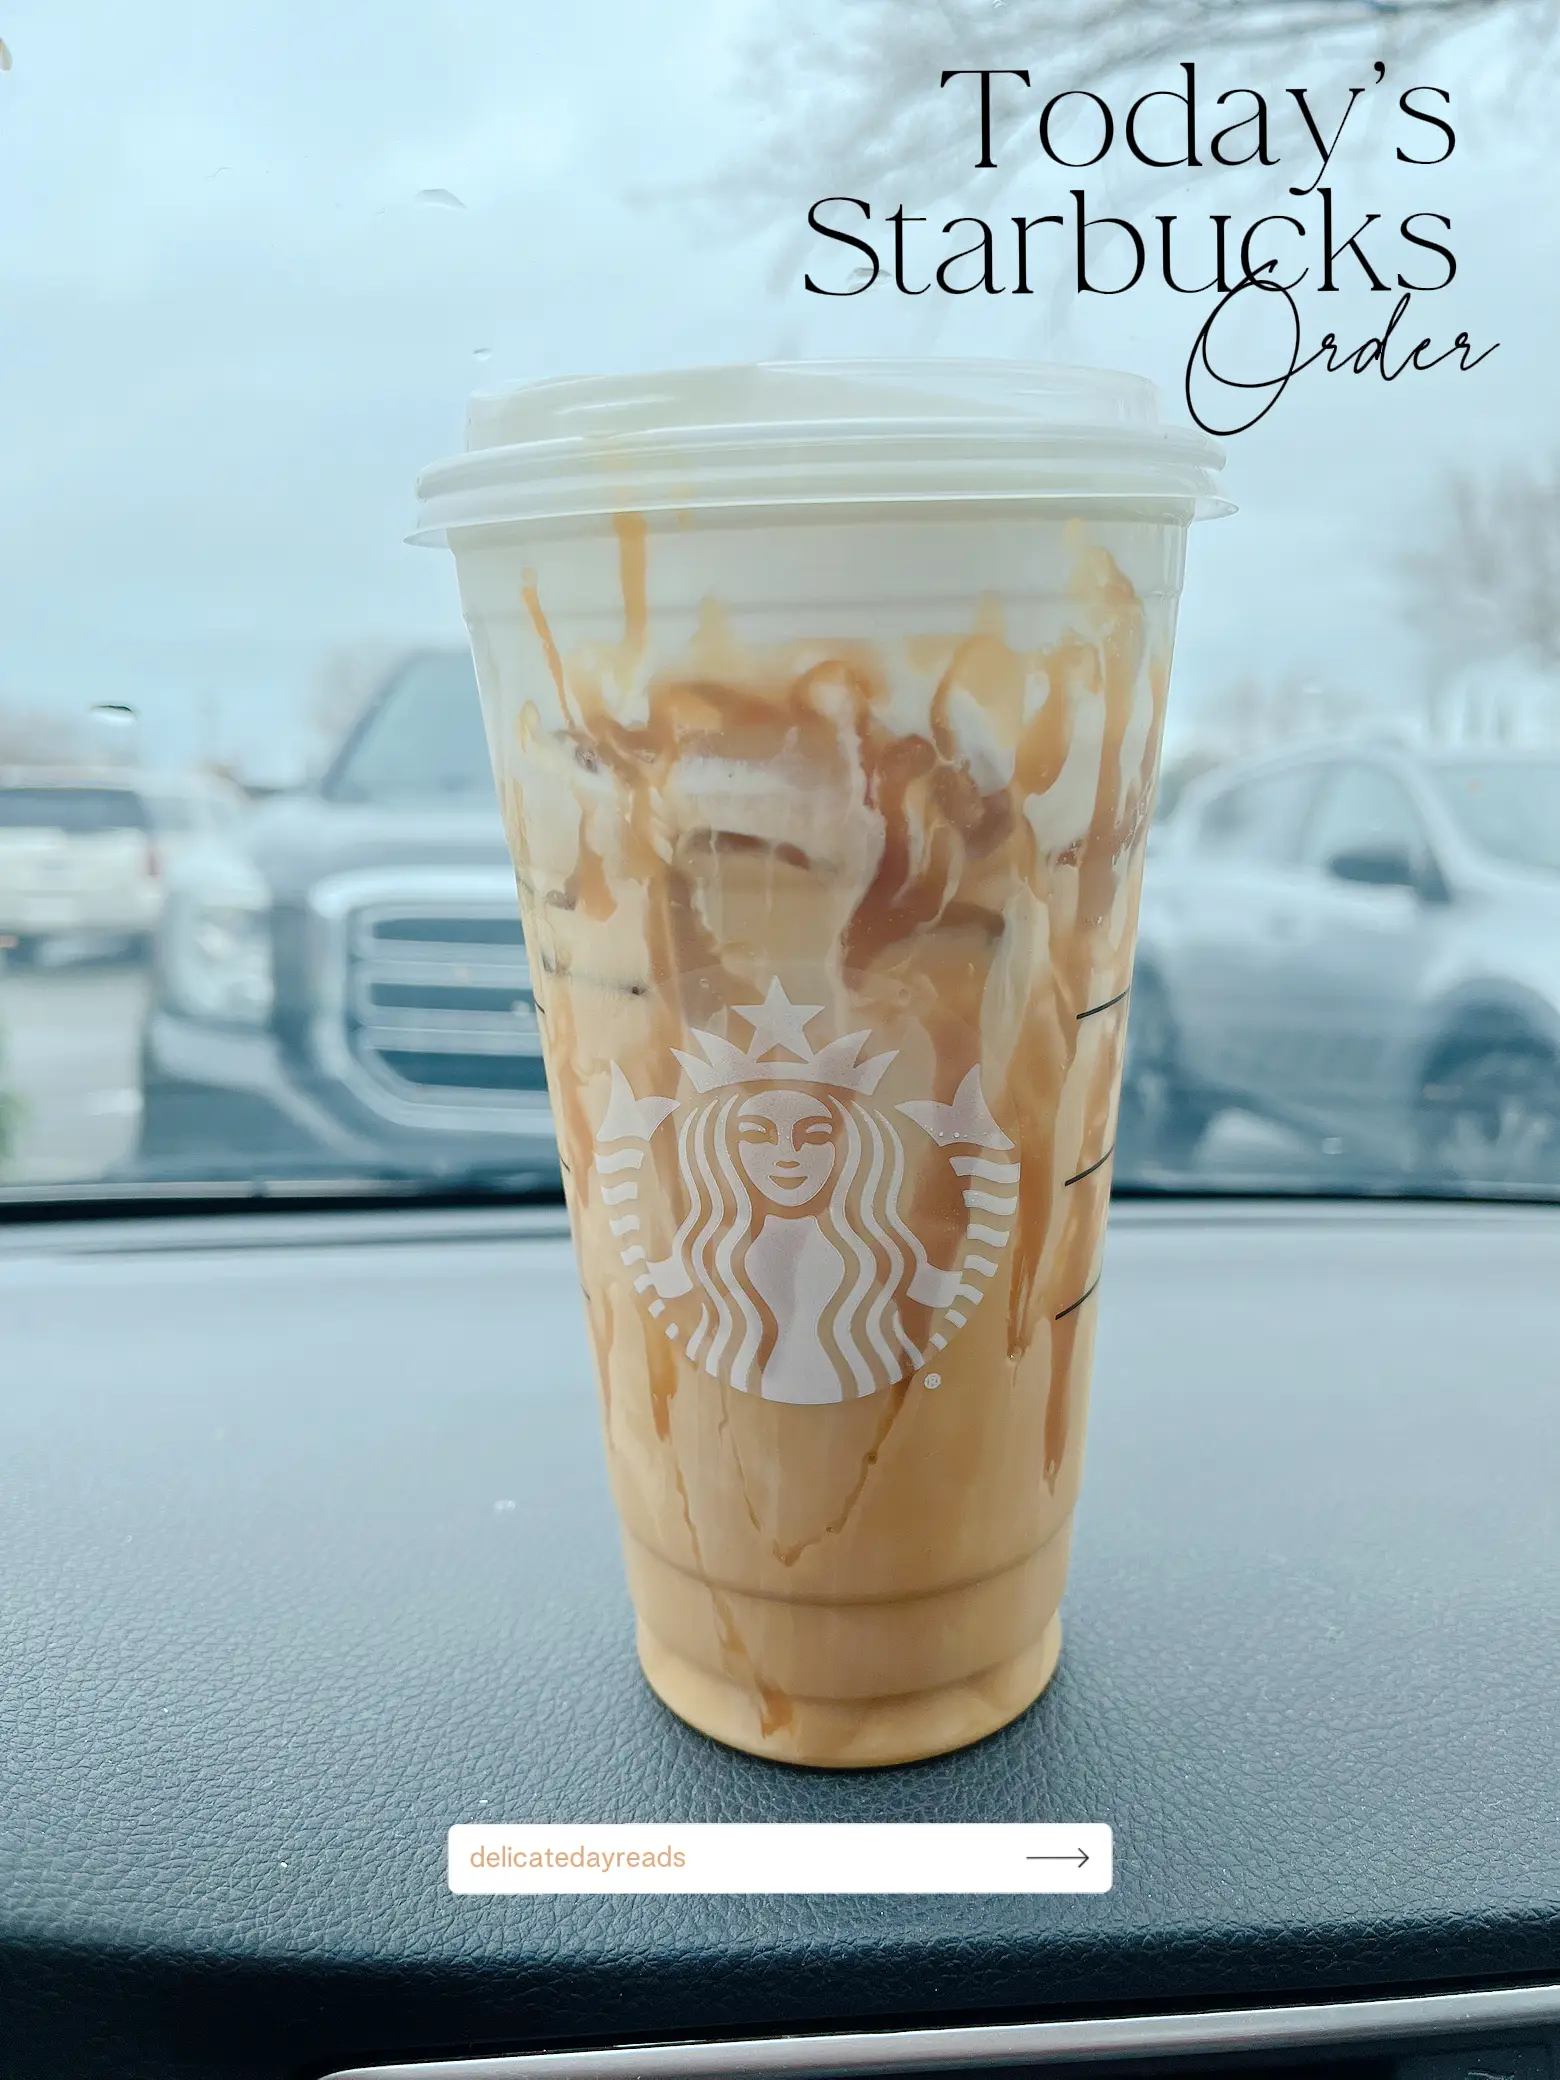 Today’s Starbucks Order's images